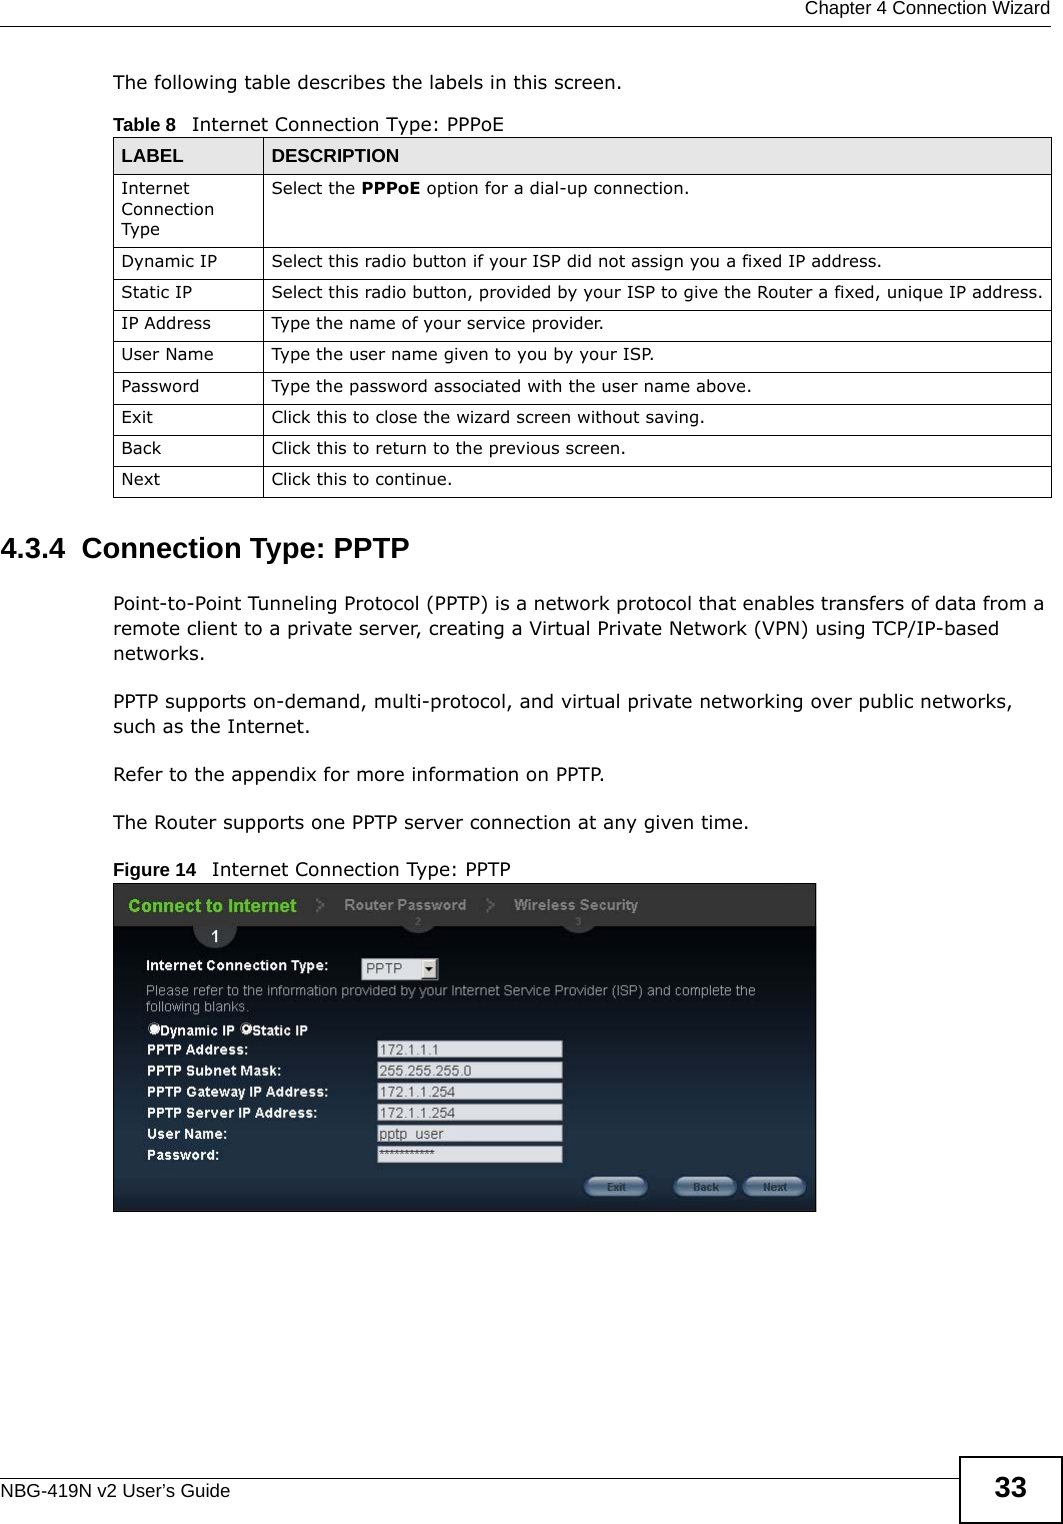  Chapter 4 Connection WizardNBG-419N v2 User’s Guide 33The following table describes the labels in this screen.4.3.4  Connection Type: PPTPPoint-to-Point Tunneling Protocol (PPTP) is a network protocol that enables transfers of data from a remote client to a private server, creating a Virtual Private Network (VPN) using TCP/IP-based networks.PPTP supports on-demand, multi-protocol, and virtual private networking over public networks, such as the Internet.Refer to the appendix for more information on PPTP.The Router supports one PPTP server connection at any given time.Figure 14   Internet Connection Type: PPTP Table 8   Internet Connection Type: PPPoELABEL DESCRIPTIONInternet Connection TypeSelect the PPPoE option for a dial-up connection.Dynamic IP Select this radio button if your ISP did not assign you a fixed IP address.Static IP Select this radio button, provided by your ISP to give the Router a fixed, unique IP address.IP Address Type the name of your service provider.User Name Type the user name given to you by your ISP. Password  Type the password associated with the user name above.Exit Click this to close the wizard screen without saving.Back Click this to return to the previous screen.Next Click this to continue. 